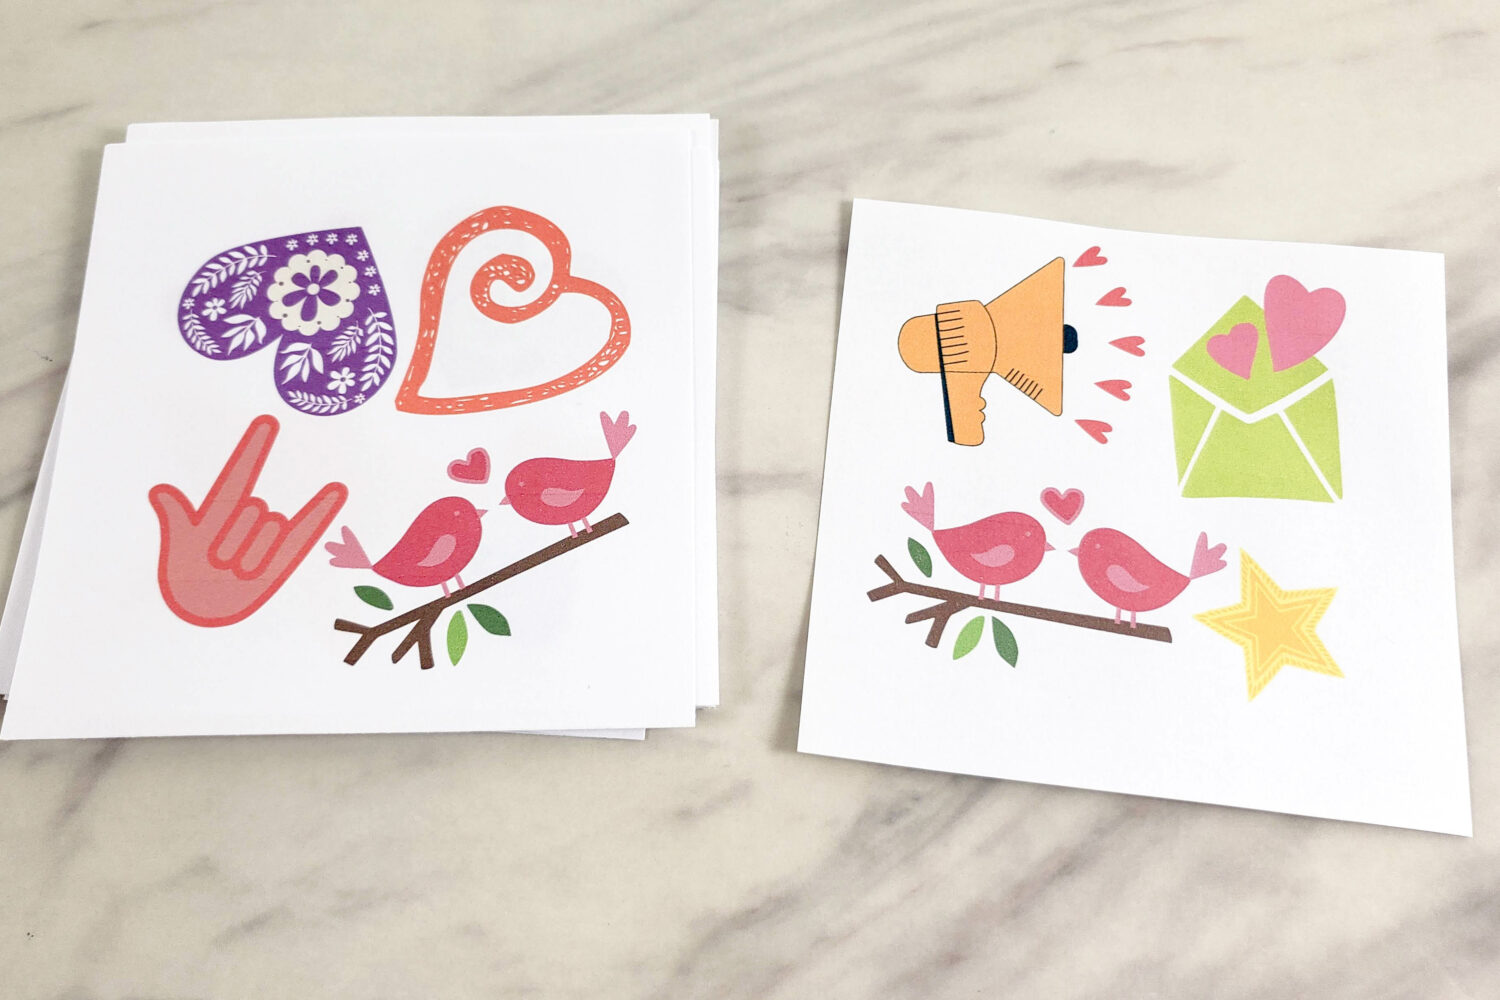 Spot It Valentine's Day Printable Game - 13 fun cards to match the symbols from one card to the next great for classrooms or at home play